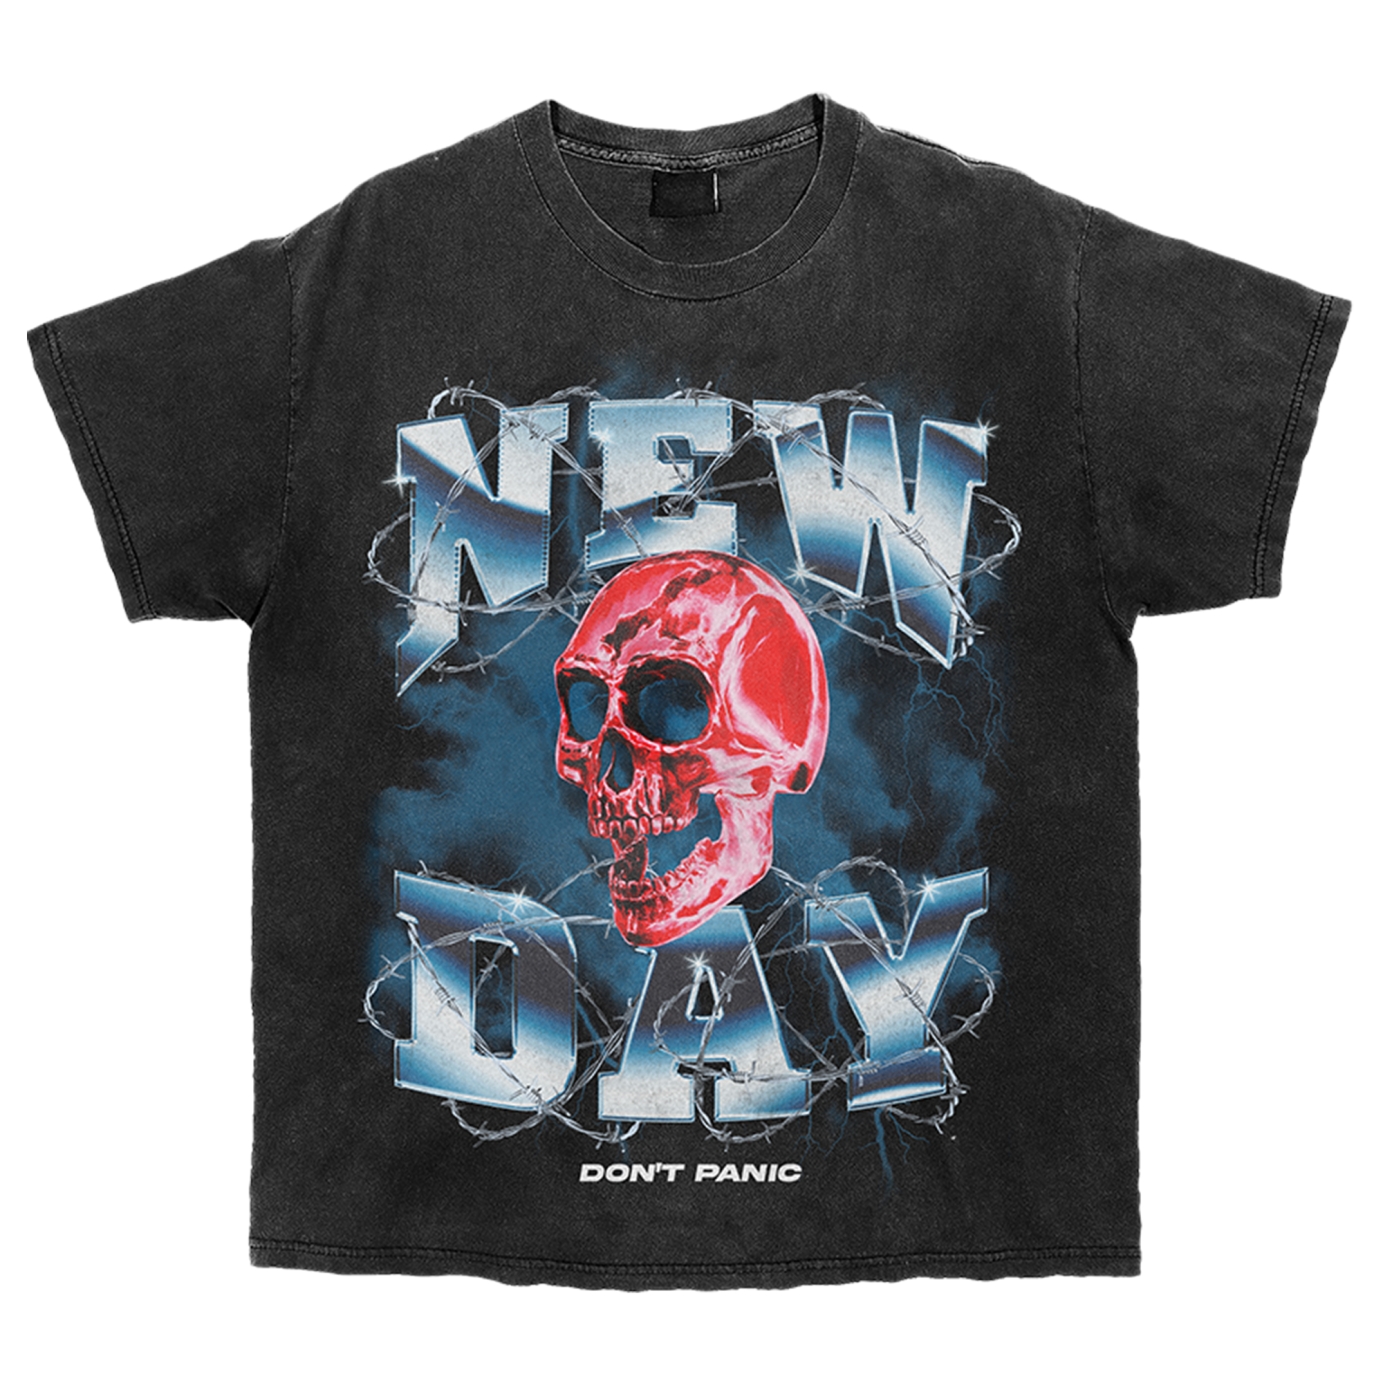 Chrome Skull Design for a local clothing brand, "NEW DAY CLOTHING"